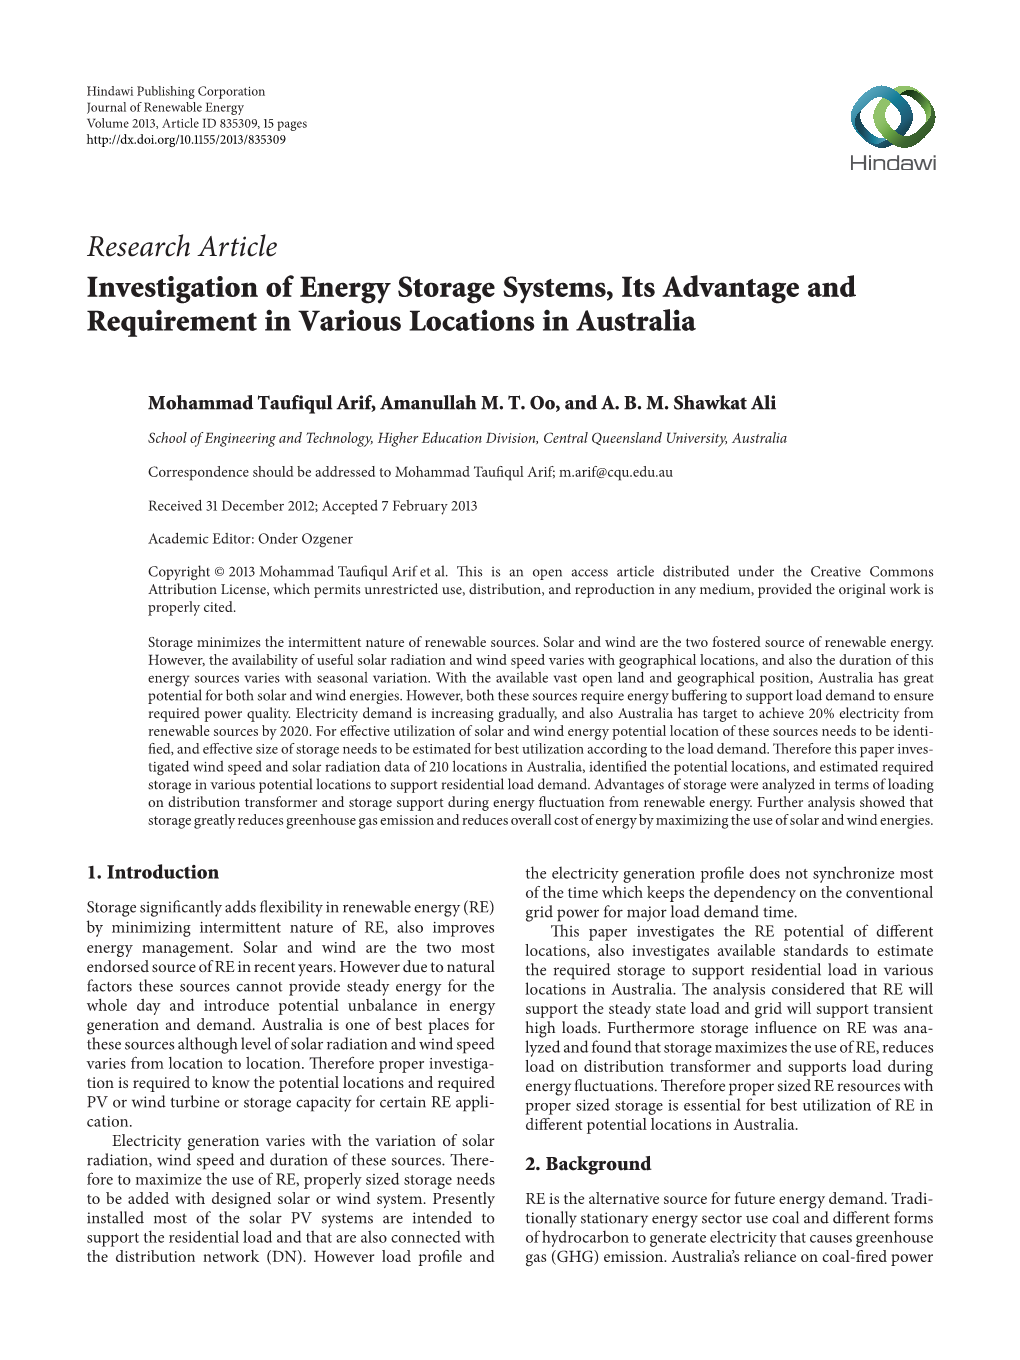 Investigation of Energy Storage Systems, Its Advantage and Requirement in Various Locations in Australia